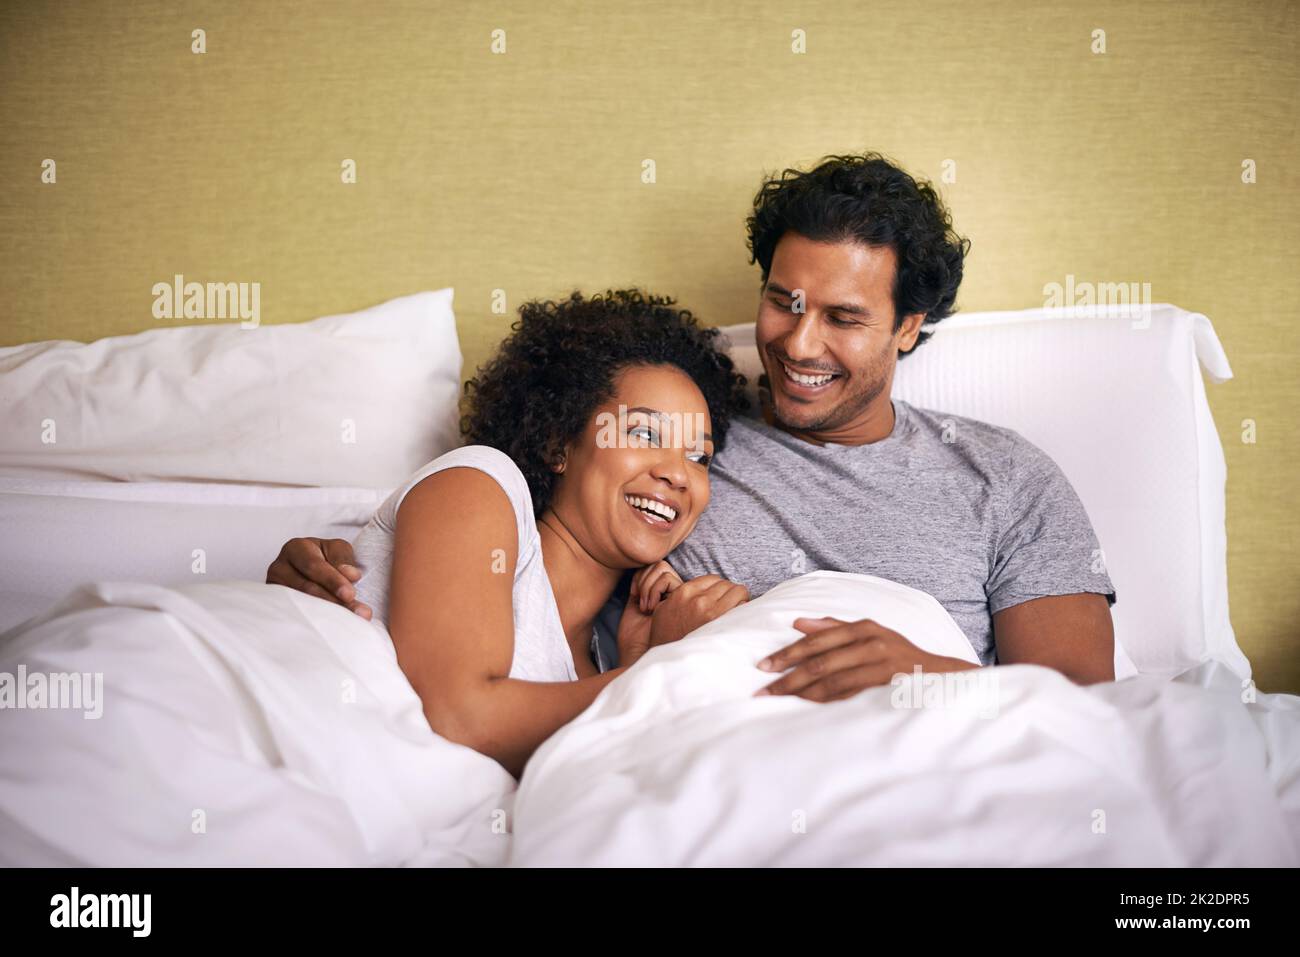 Enjoying a cuddle with the hubby. A young husband and wife lying bed together. Stock Photo